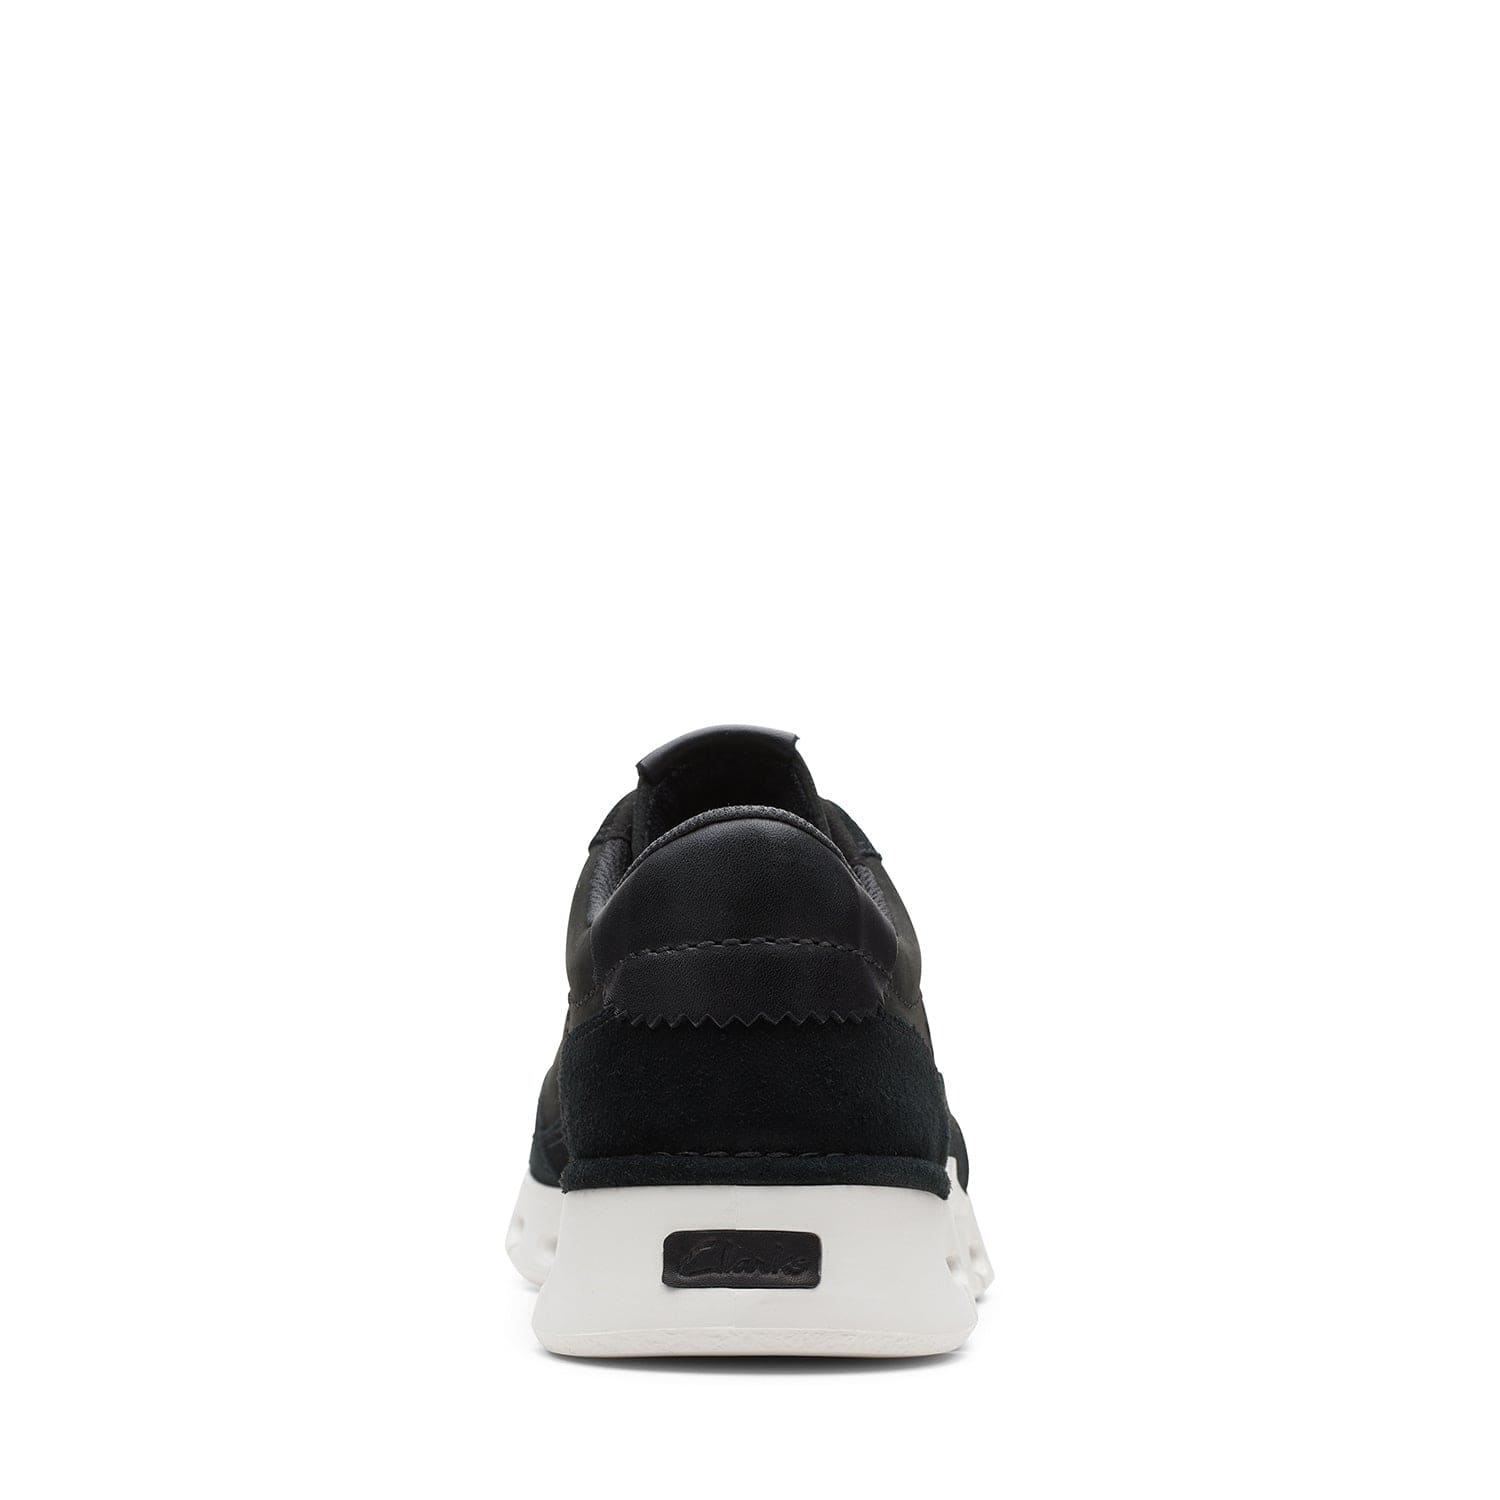 Clarks Nature X One - Shoes - Black Combi - 261660107 - G Width (Standard Fit)